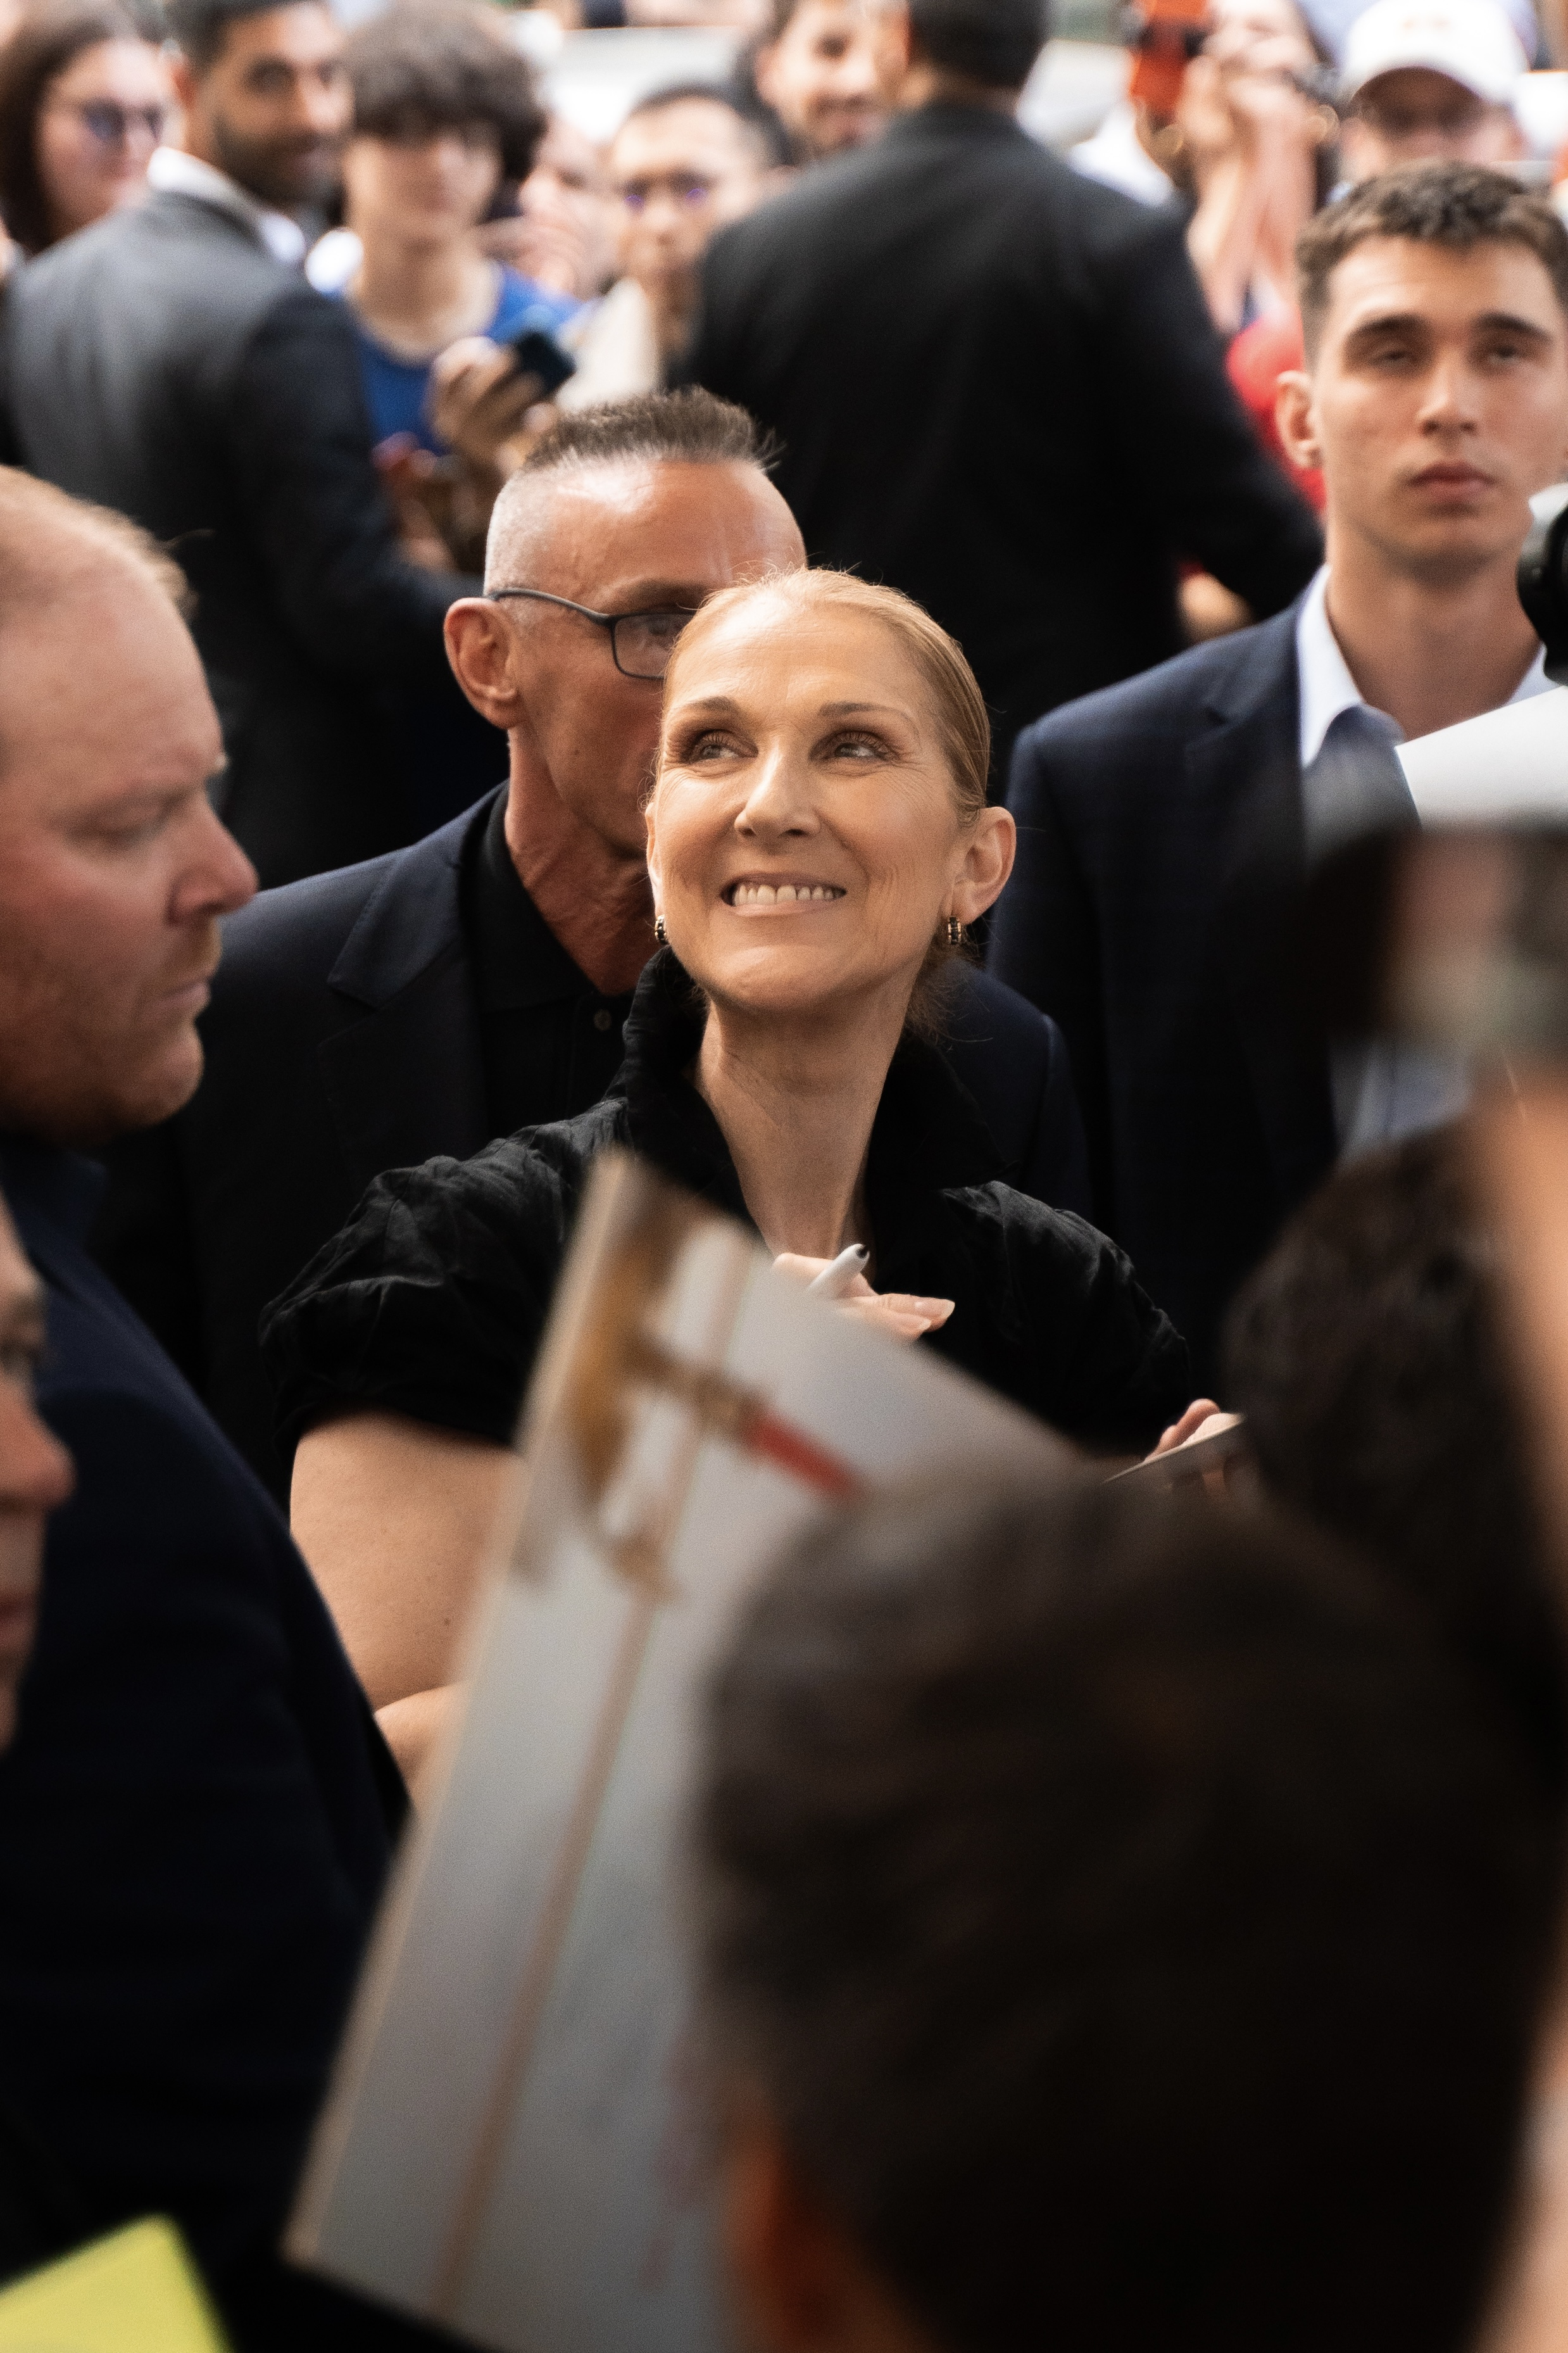 Celine Dion arrived in Paris, France, on Monday, and was seen leaving her hotel in good spirits